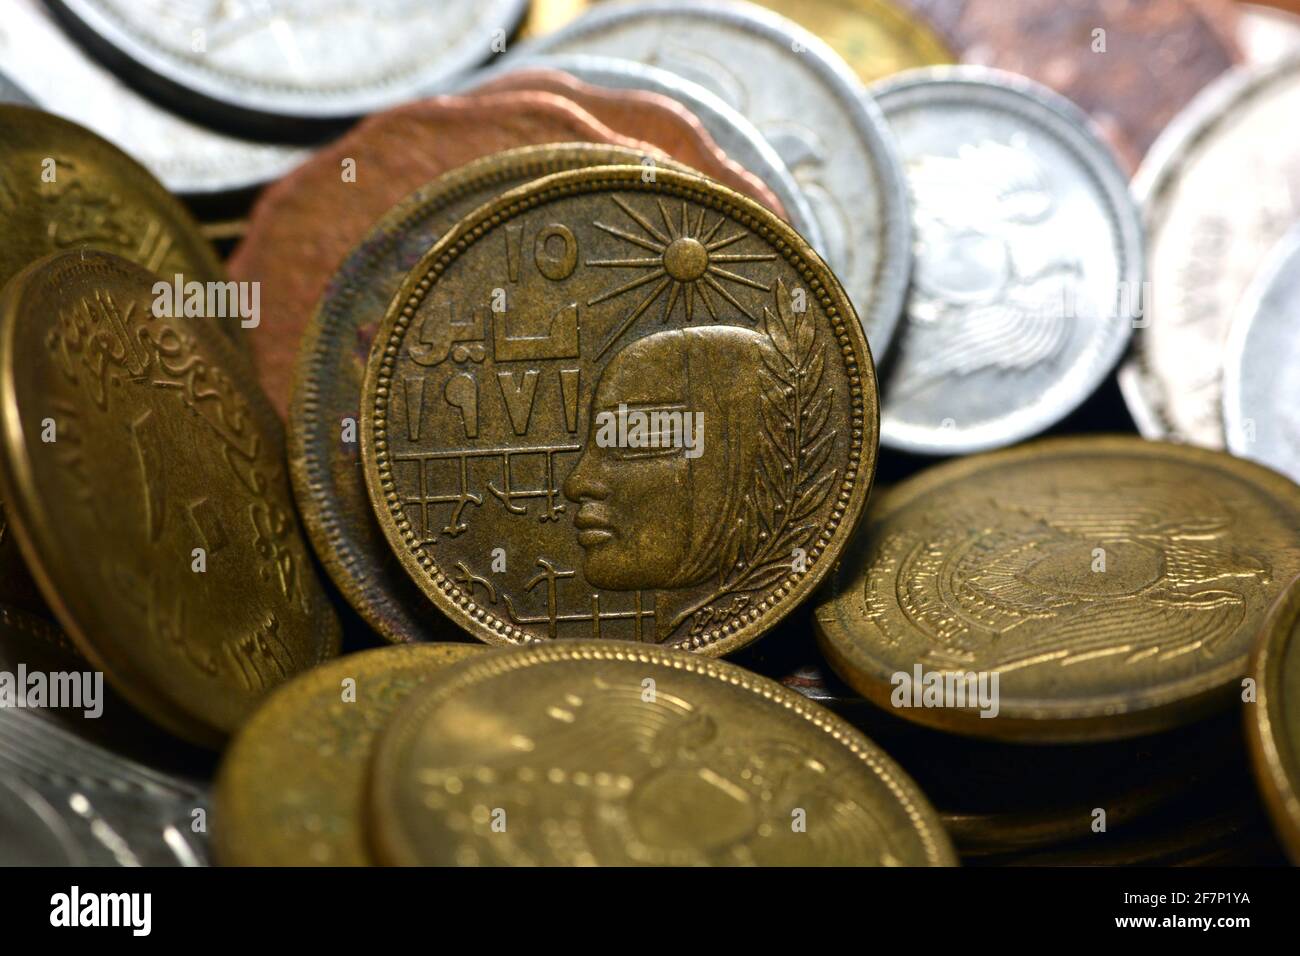 collection of old Egyptian coins background Stock Photo